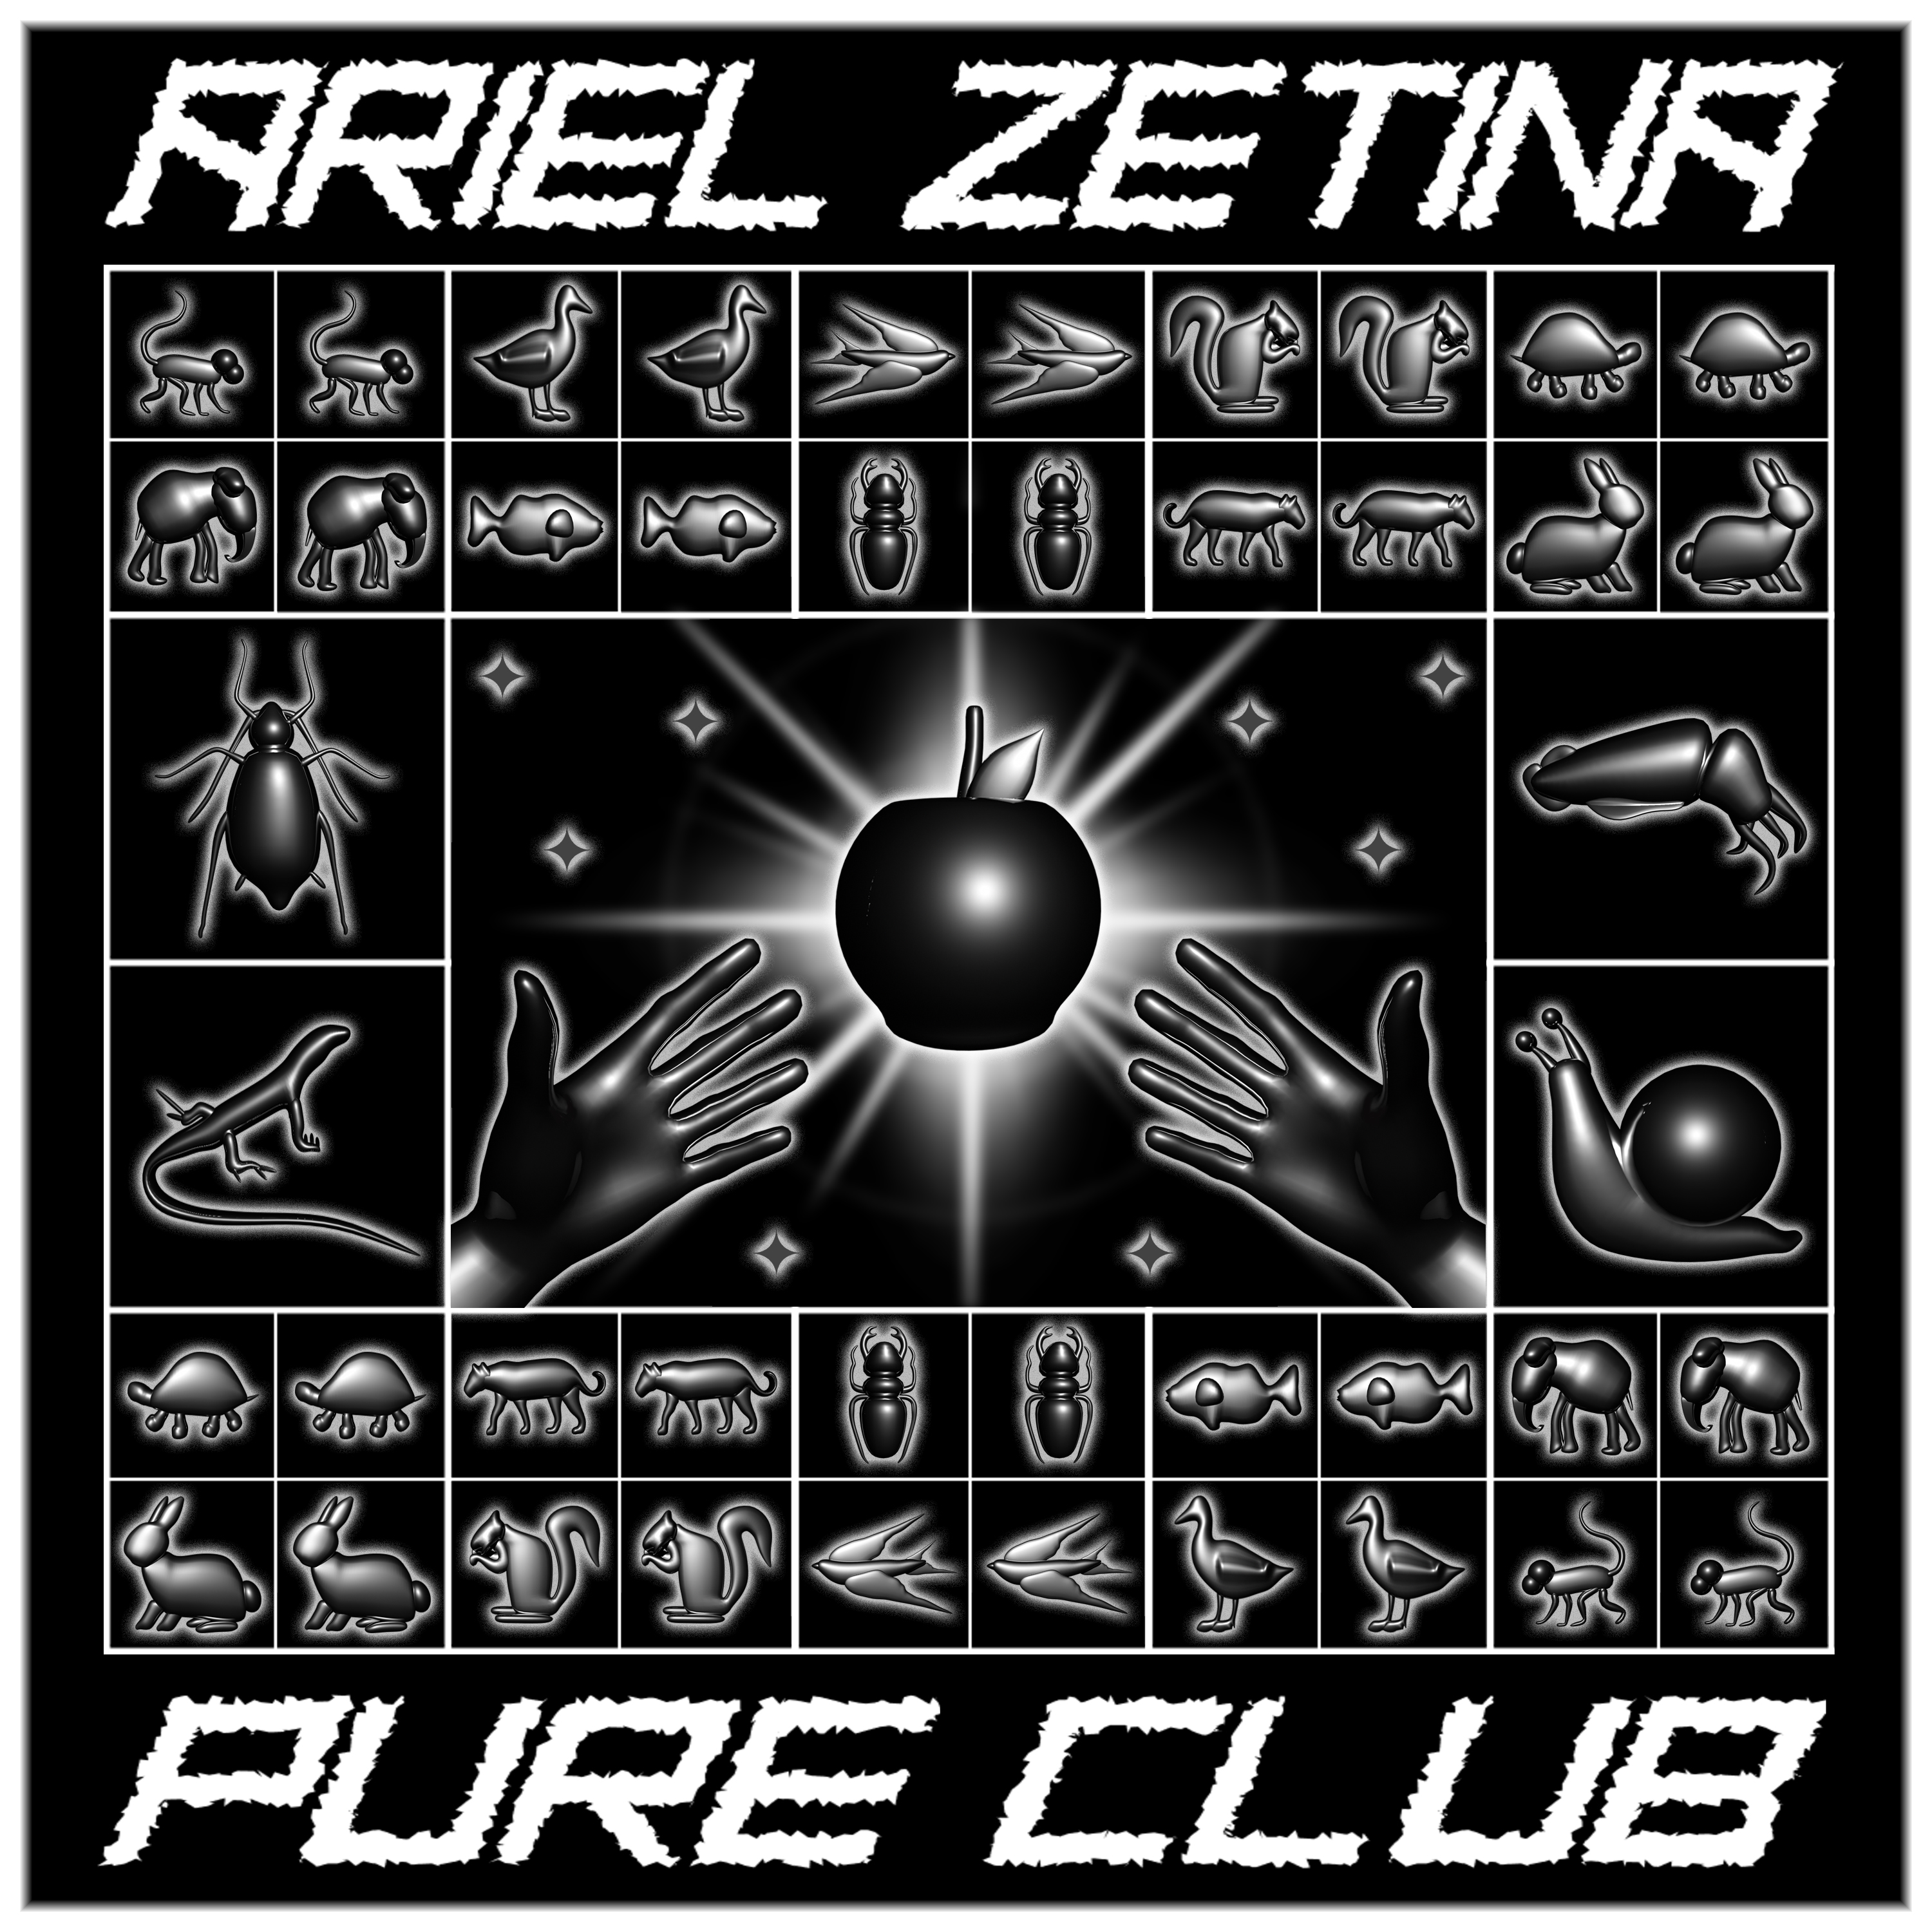 Pure Club graphic album cover with a chart of 3D rendered animals surrounding an image of hands reaching out towards a glowing apple